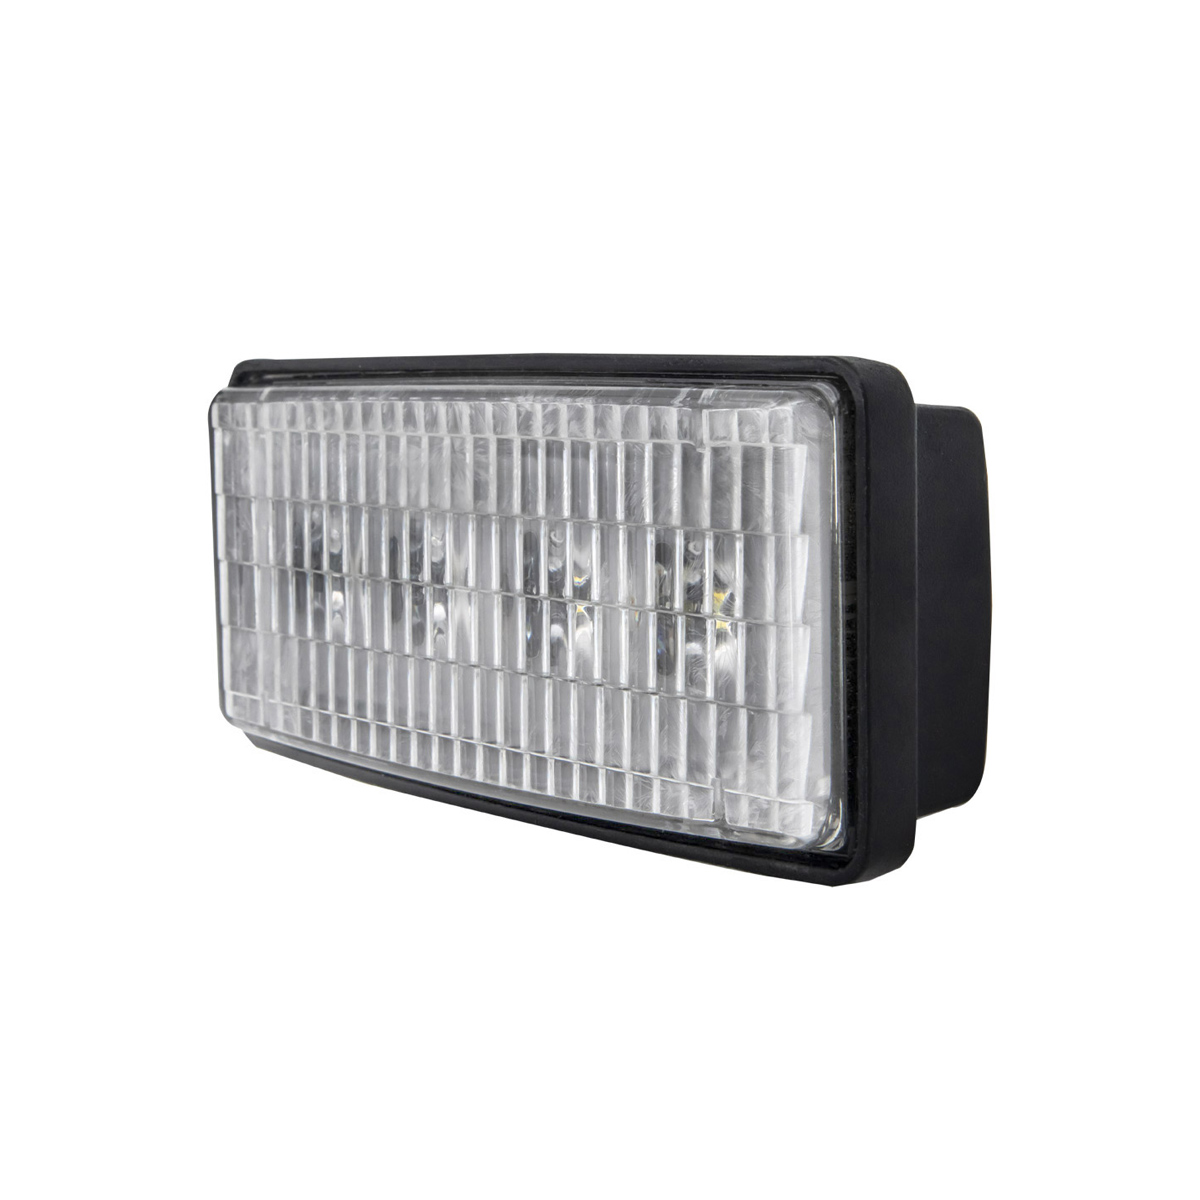 Agricultural Light - OW-4012 12W 20W